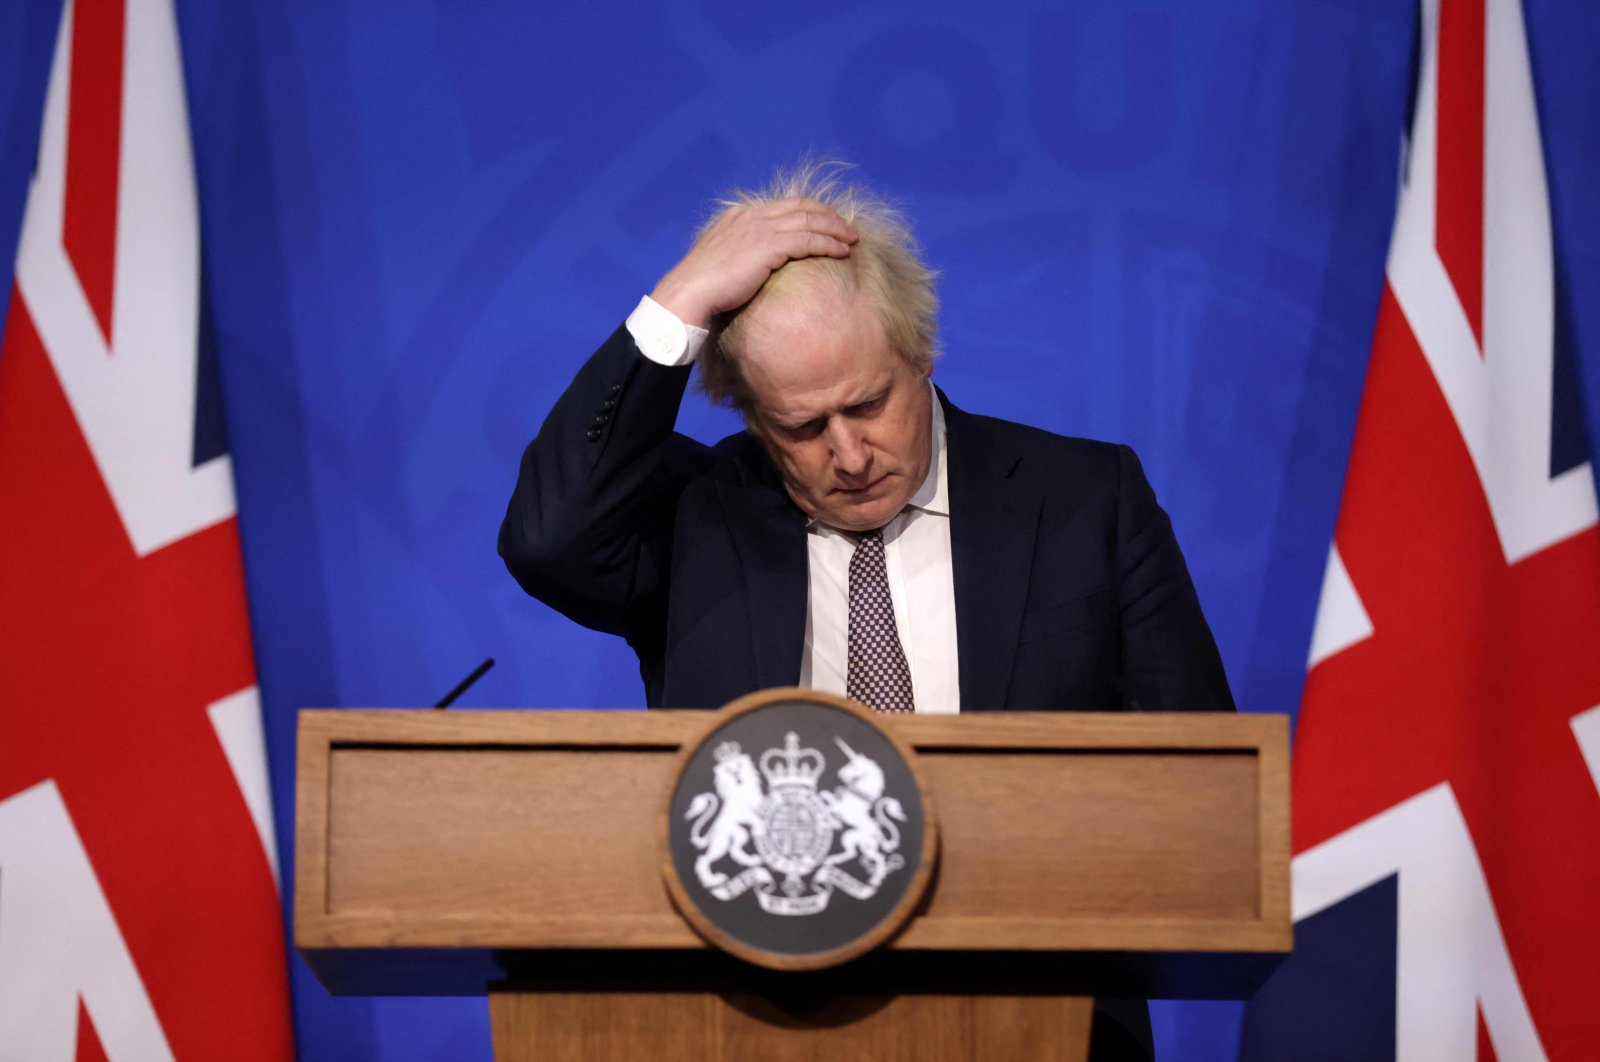  Britain&#039;s then-Prime Minister Boris Johnson gestures as he attends a media briefing on the latest COVID-19 update in the Downing Street briefing room in central London, Nov. 27, 2021. (AFP File Photo)